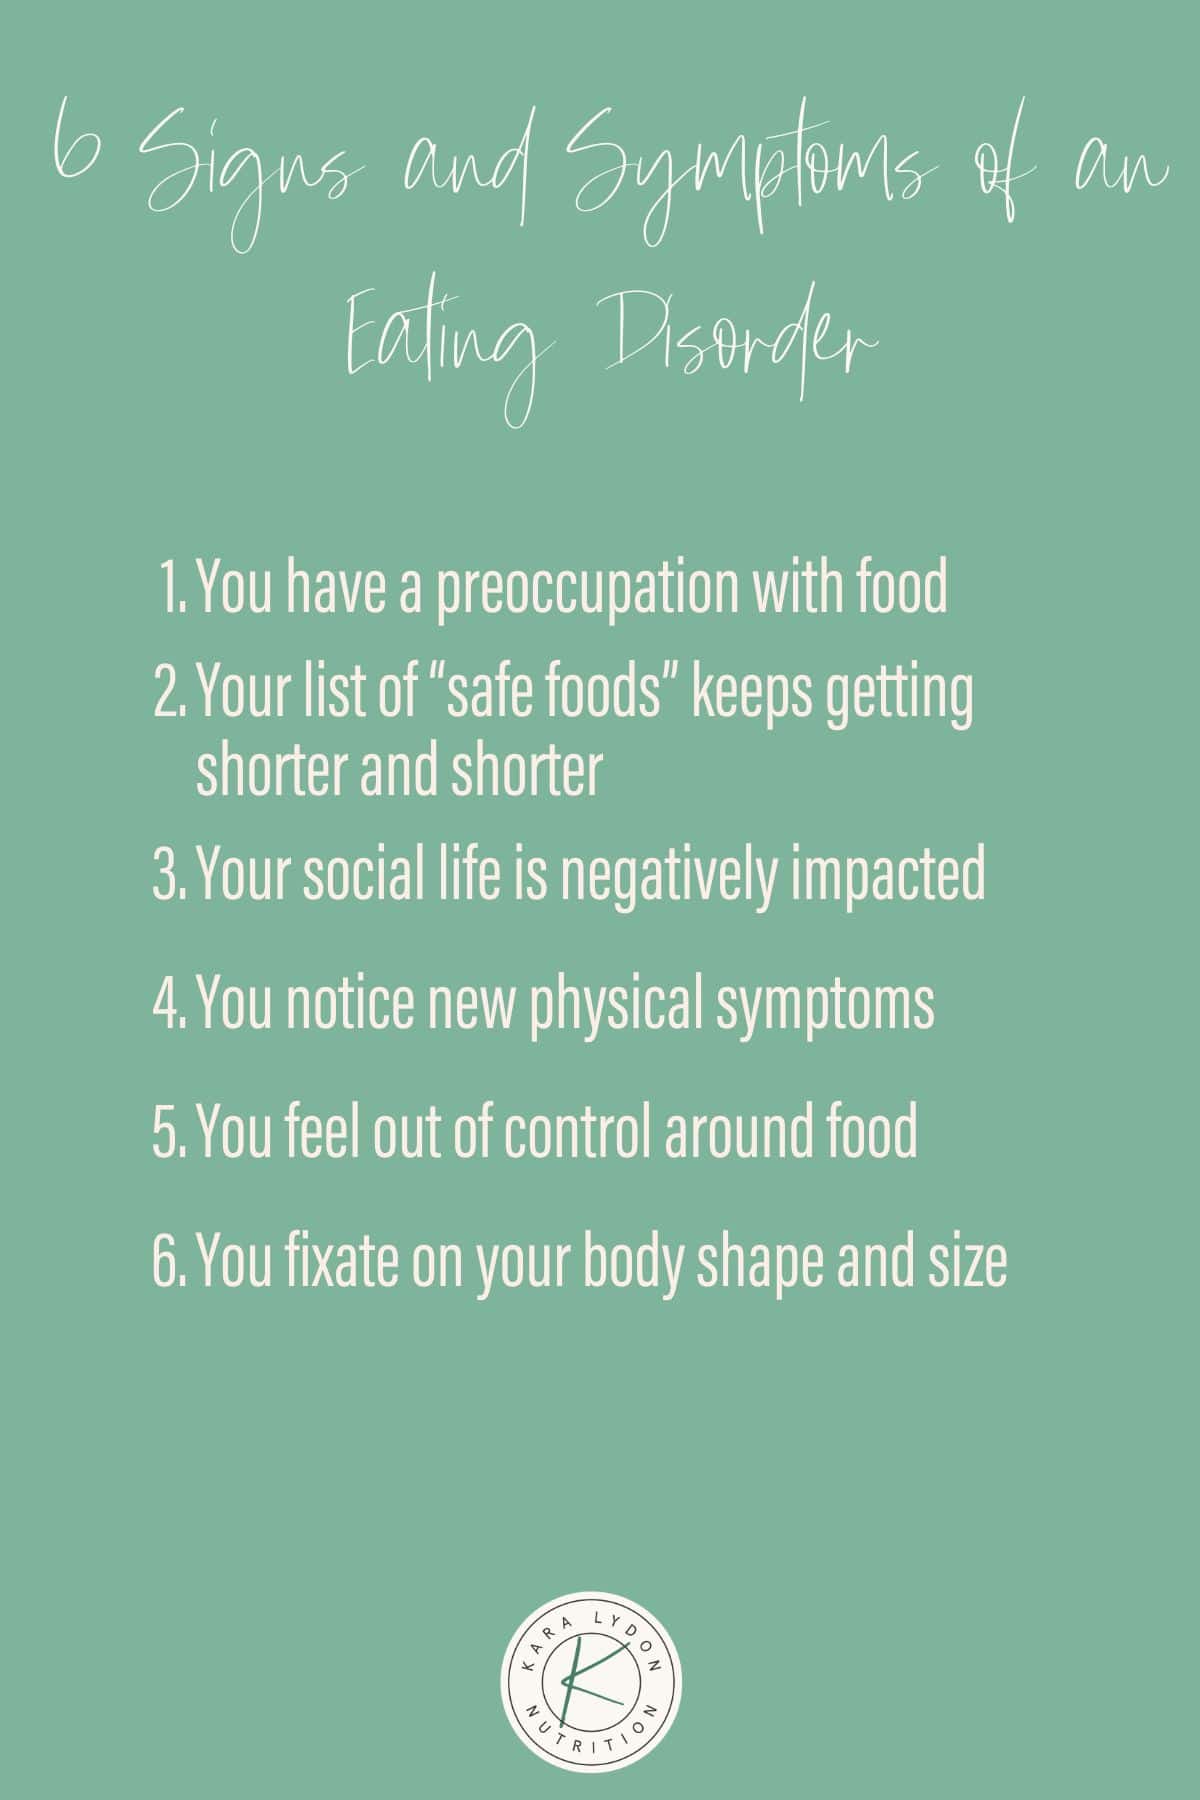 Graphic listing 6 signs and symptoms of an eating disorder